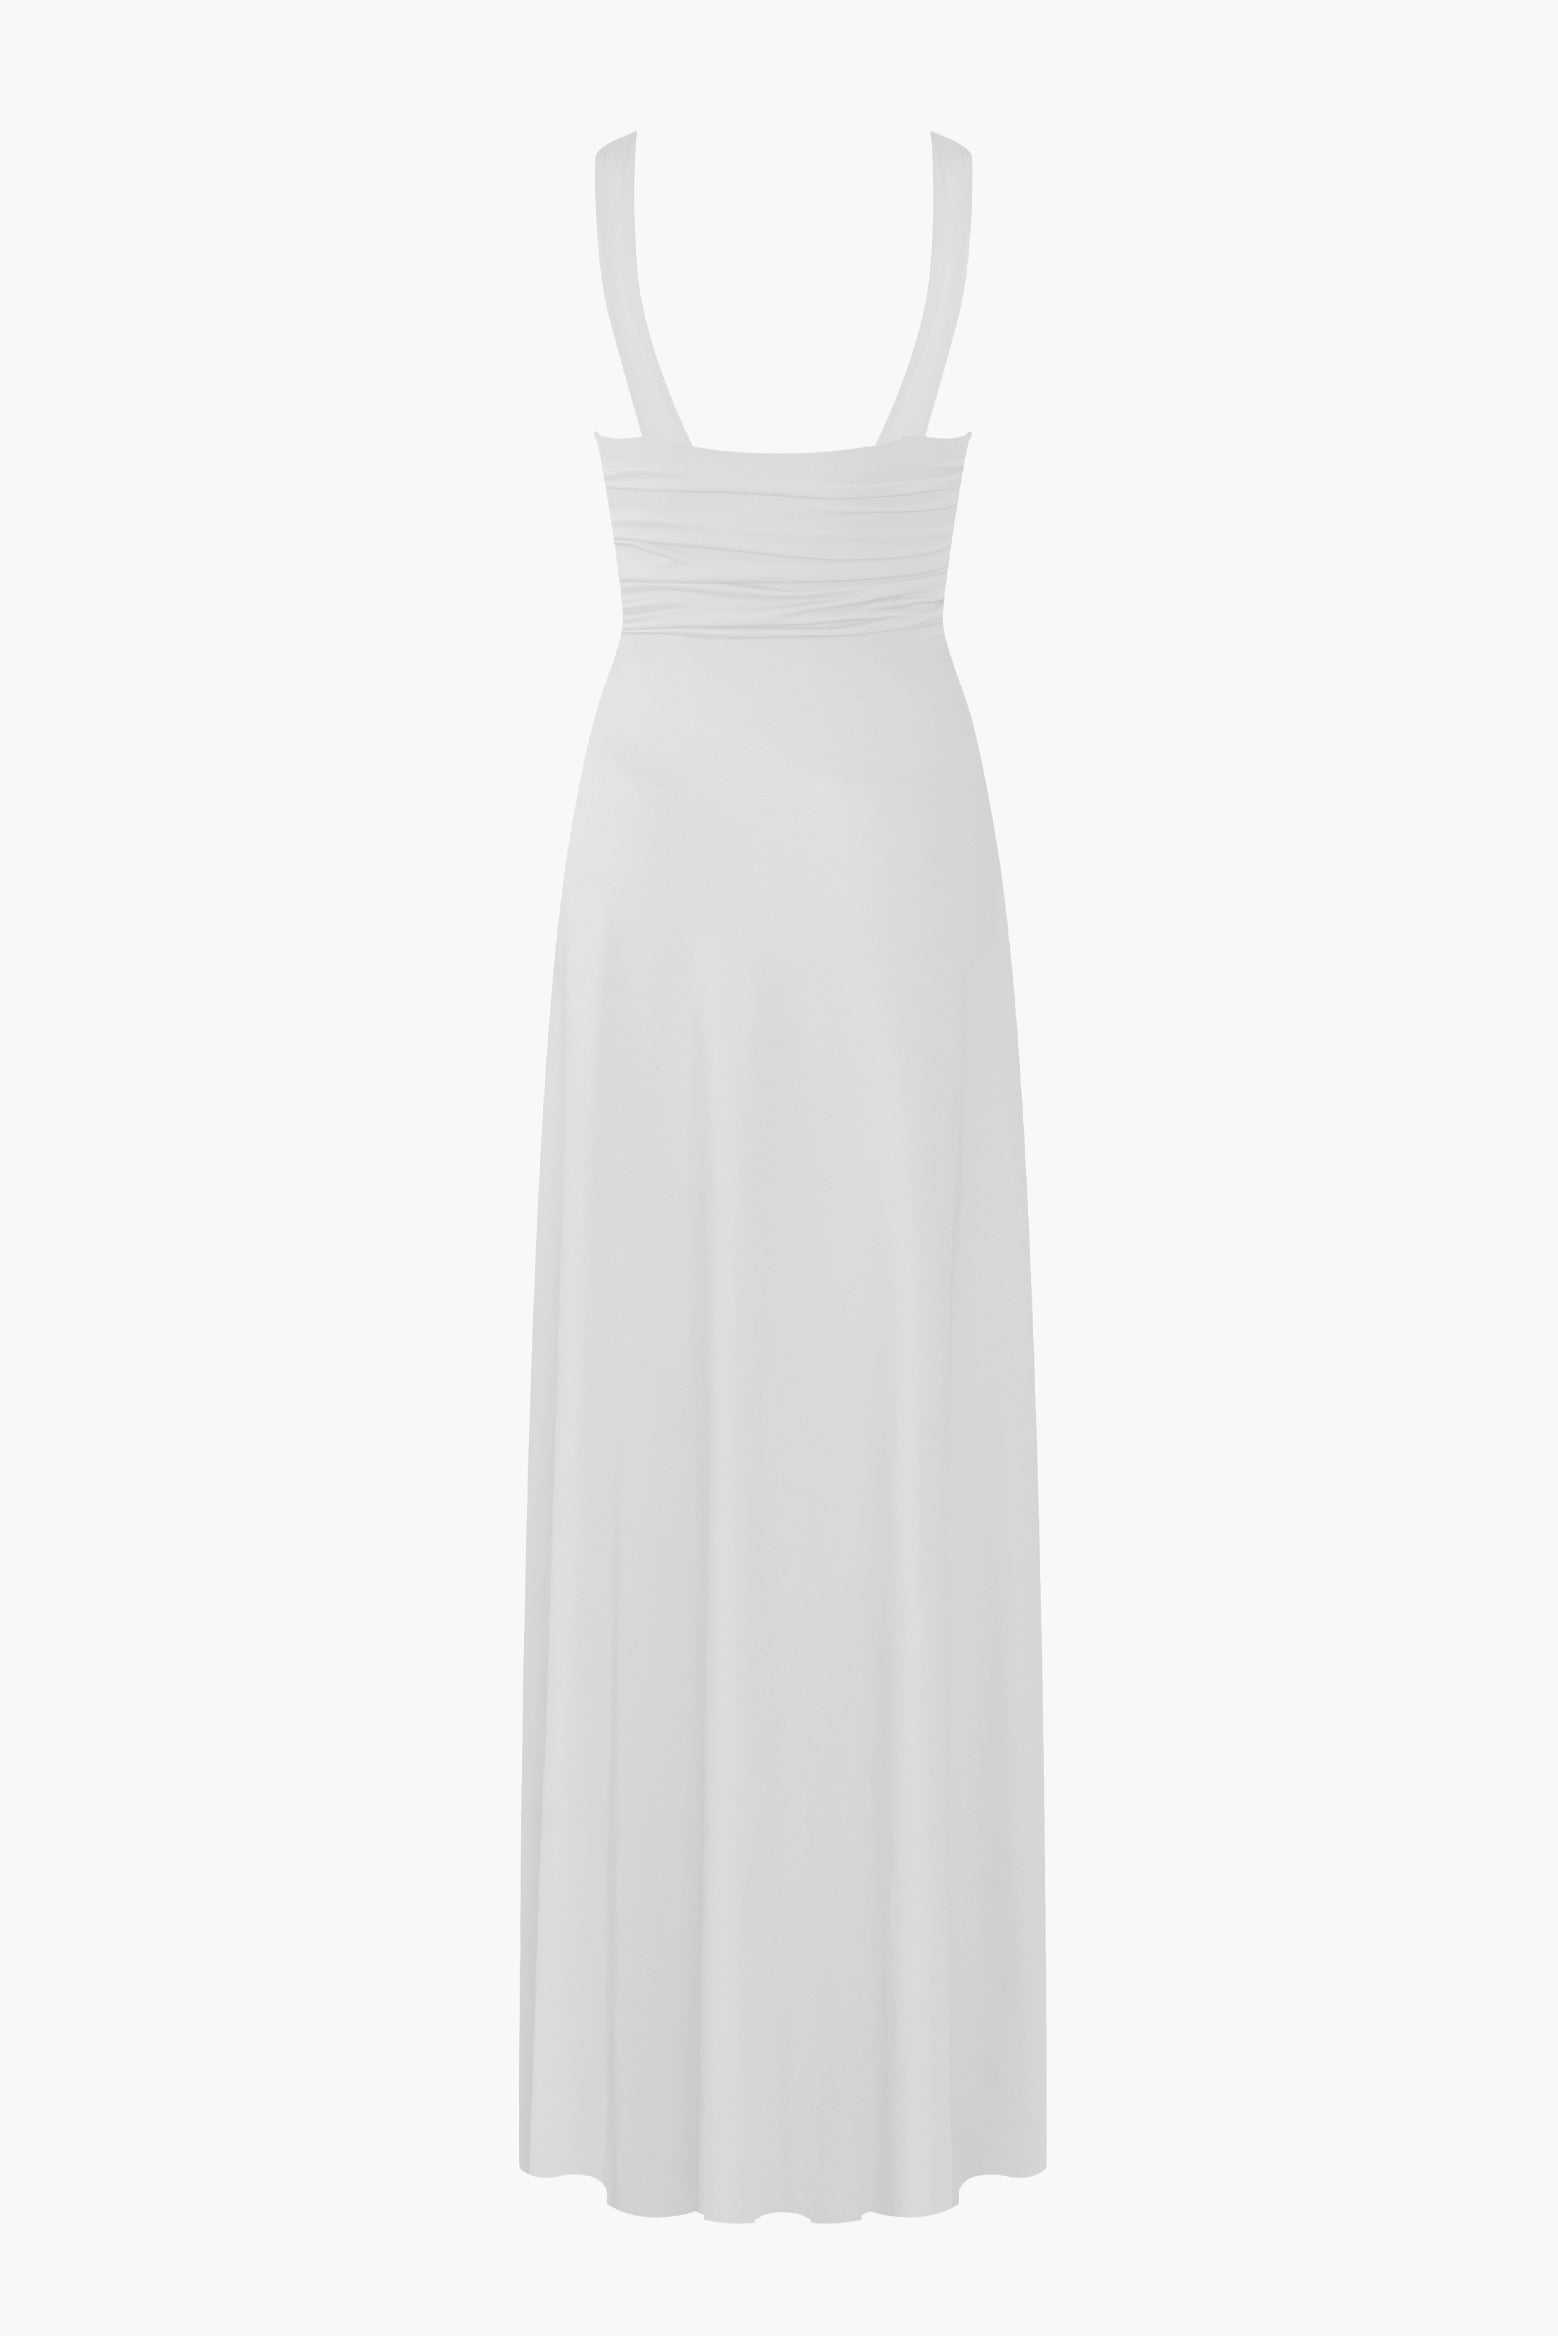 Maygel Coronel Orinoco Dress in Off White available at The New Trend Australia.